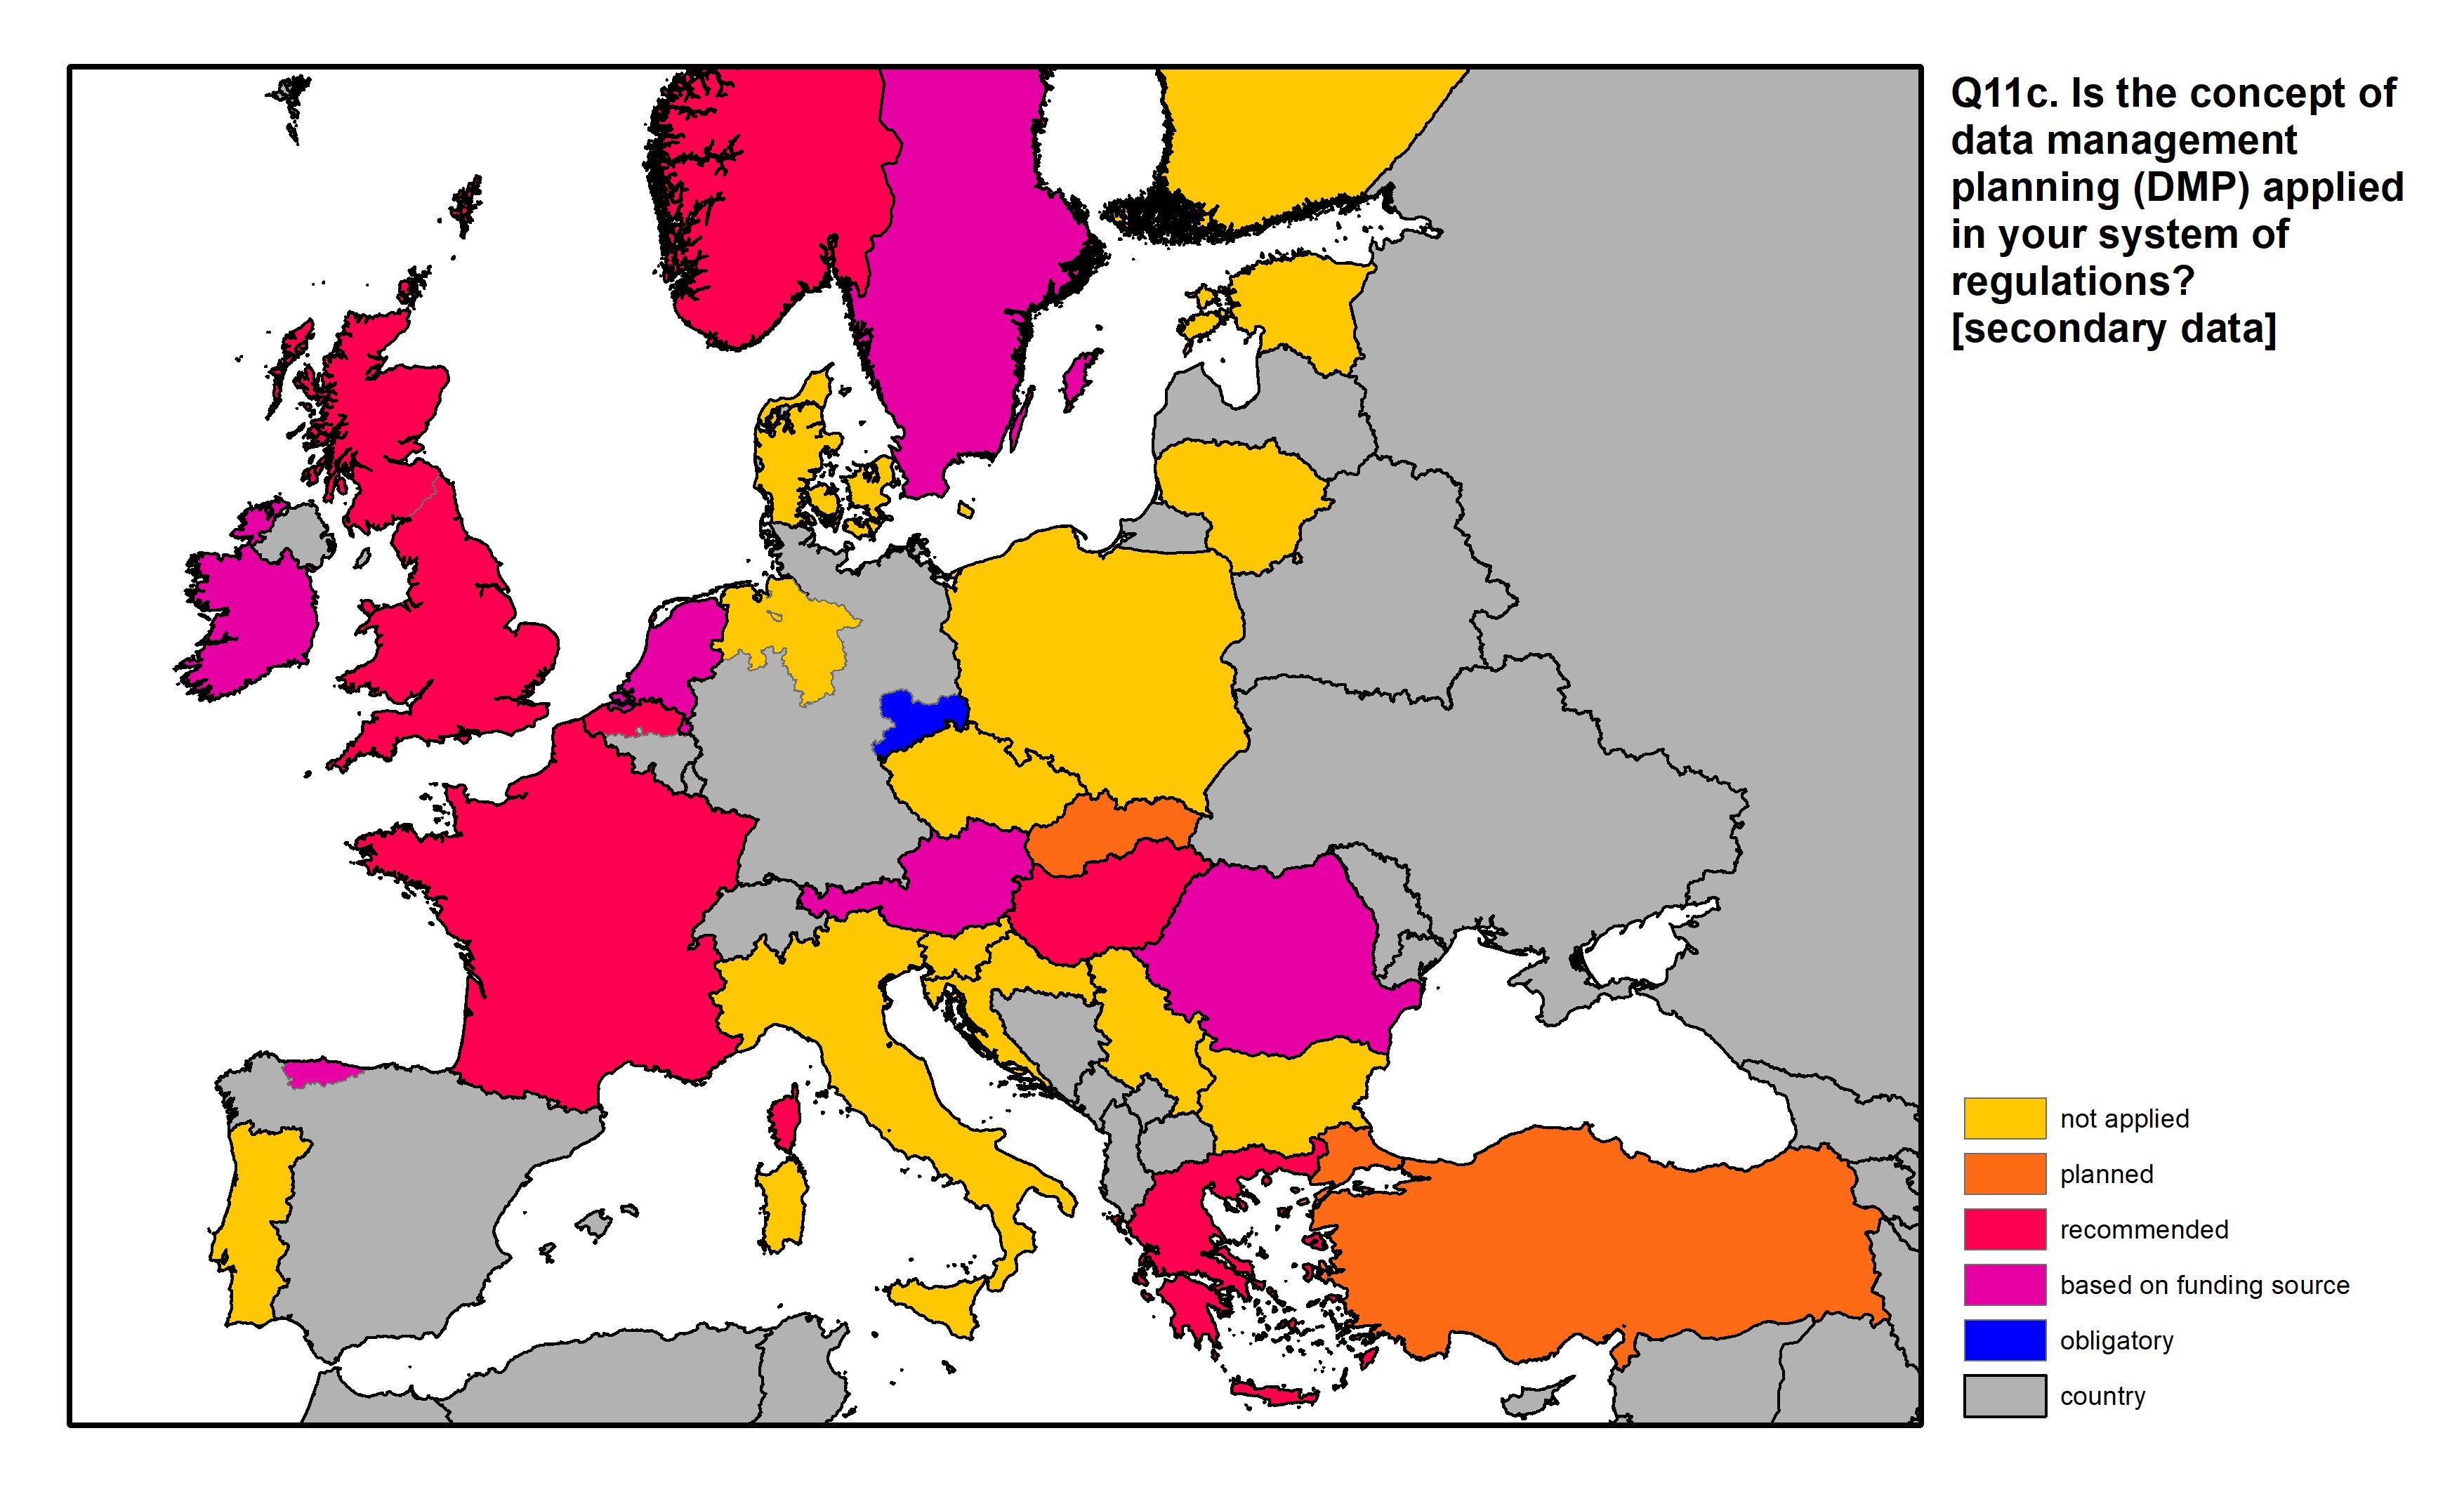 Figure 39: a map of Europe showing countries and regions in colour based on response rates to the survey question.